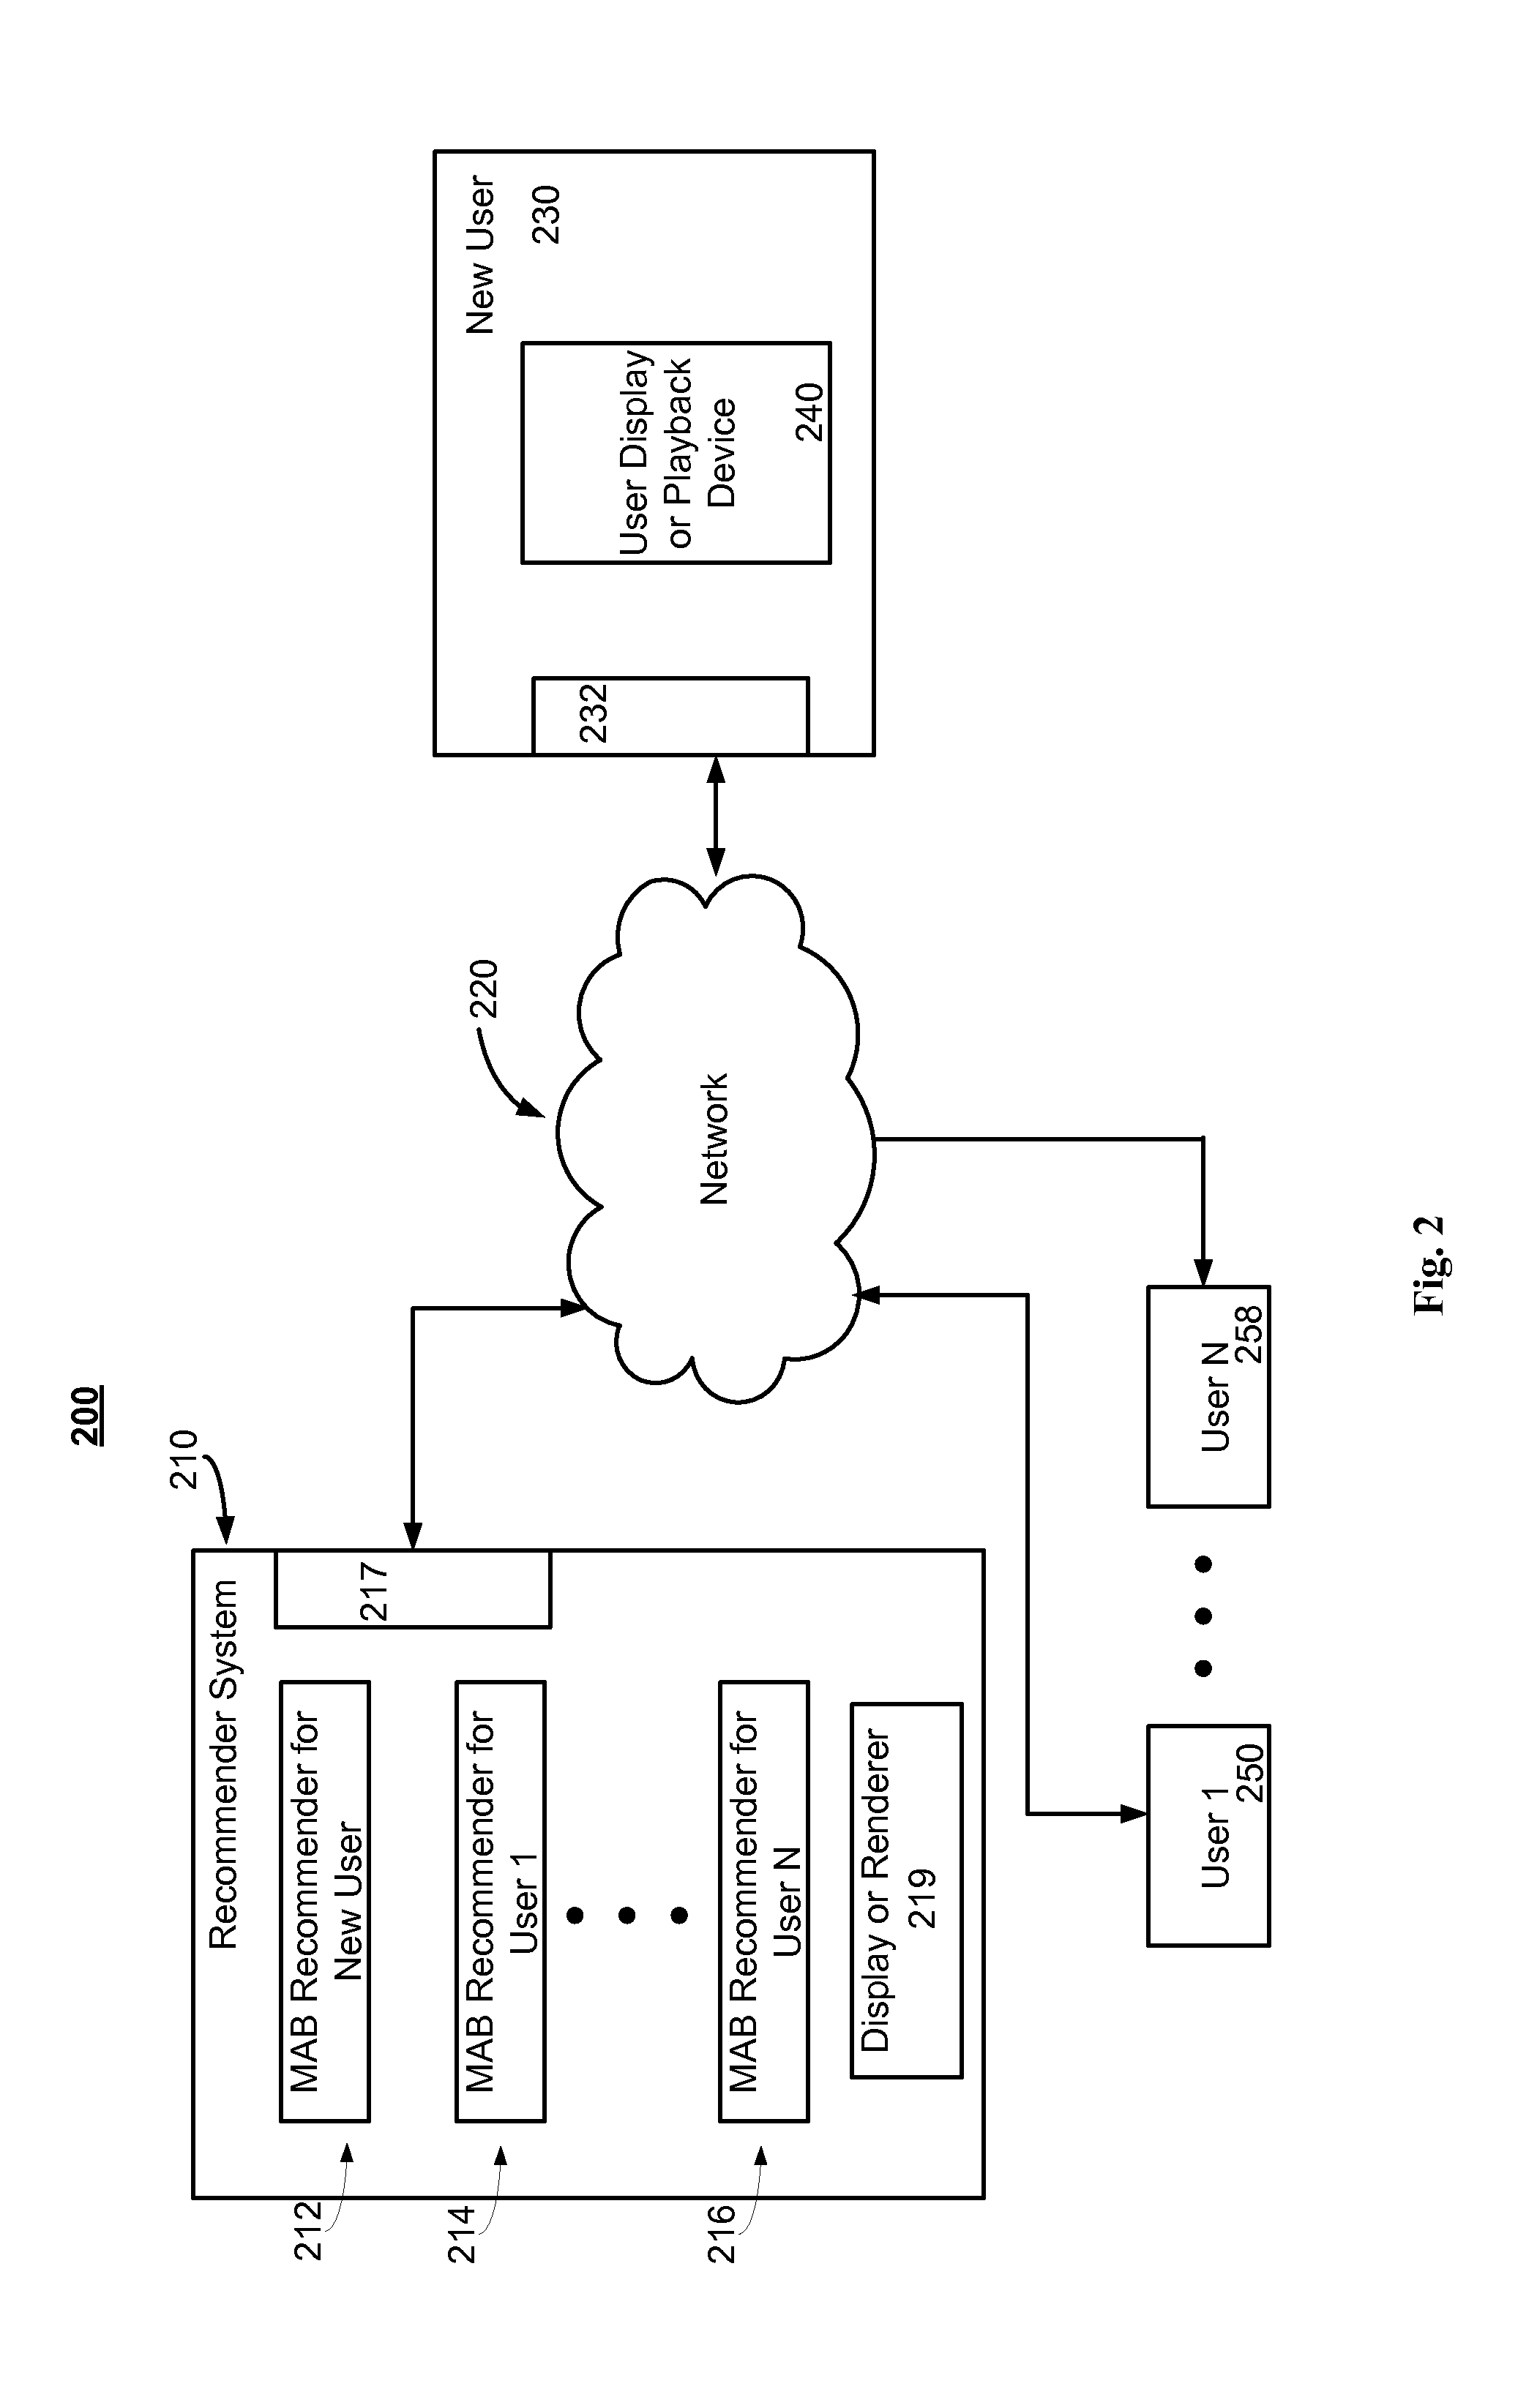 Method for cold start of a multi-armed bandit in a recommender system